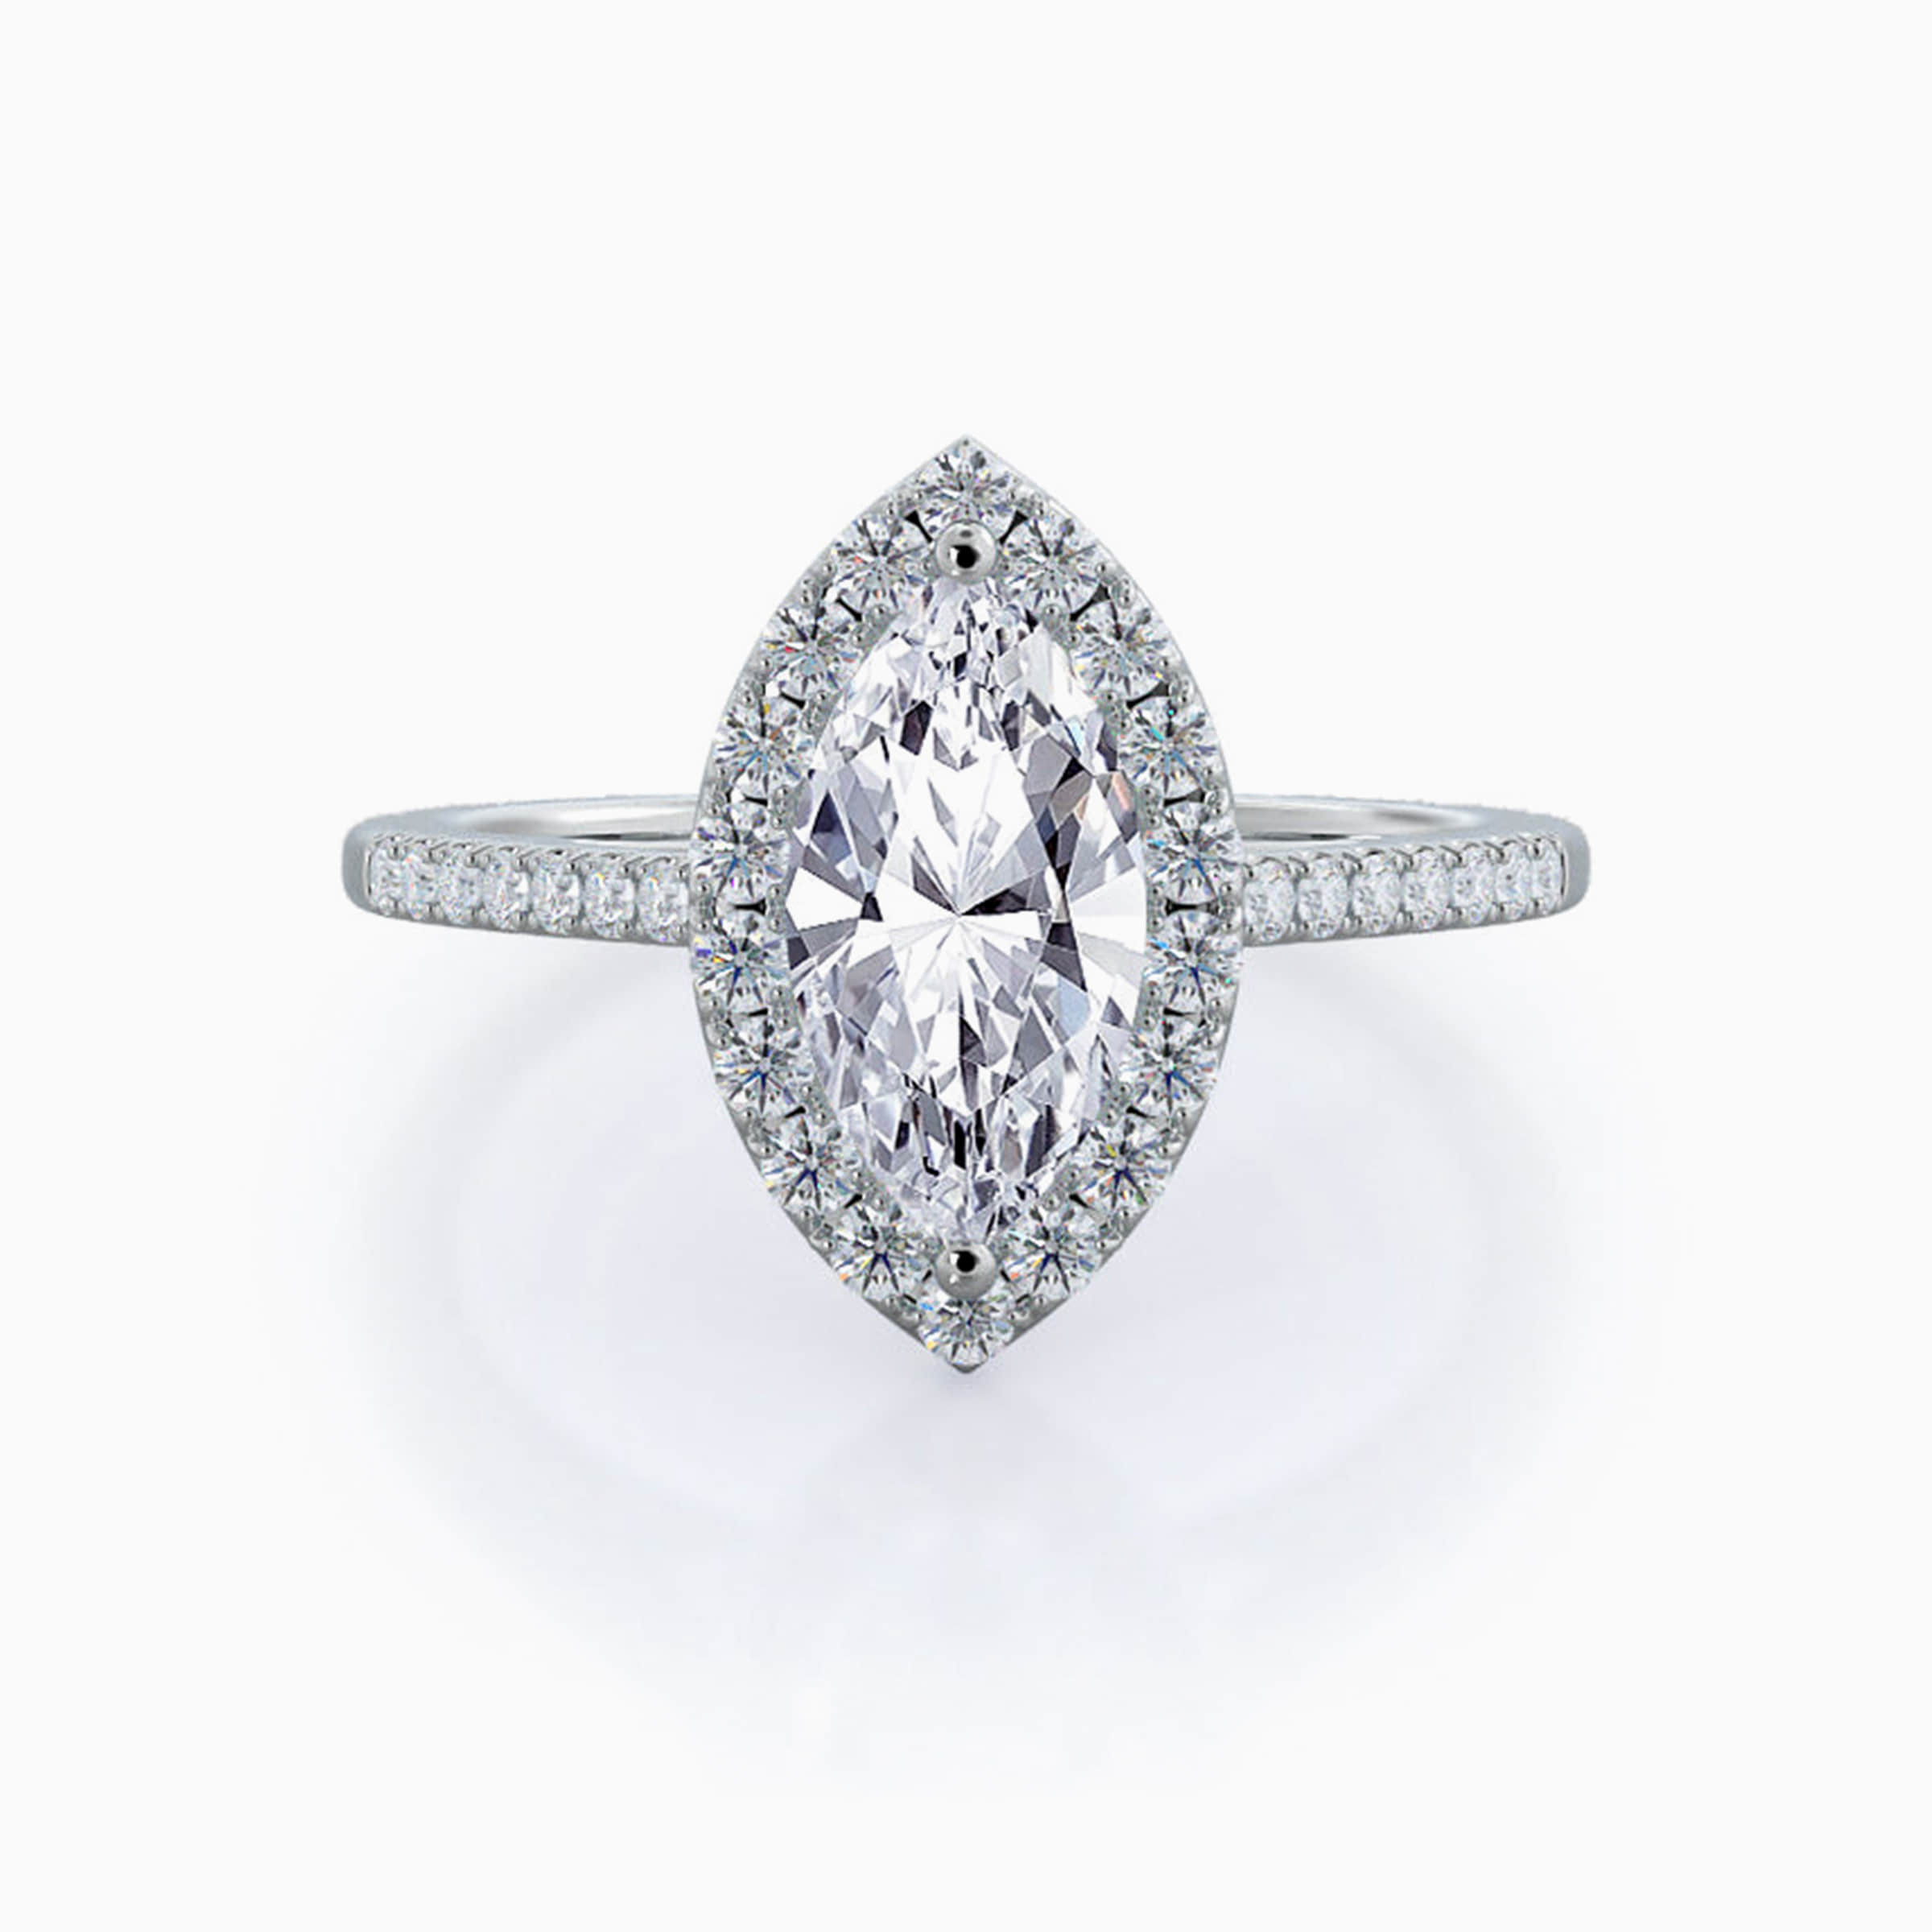 Darry Ring marquise cut engagement ring